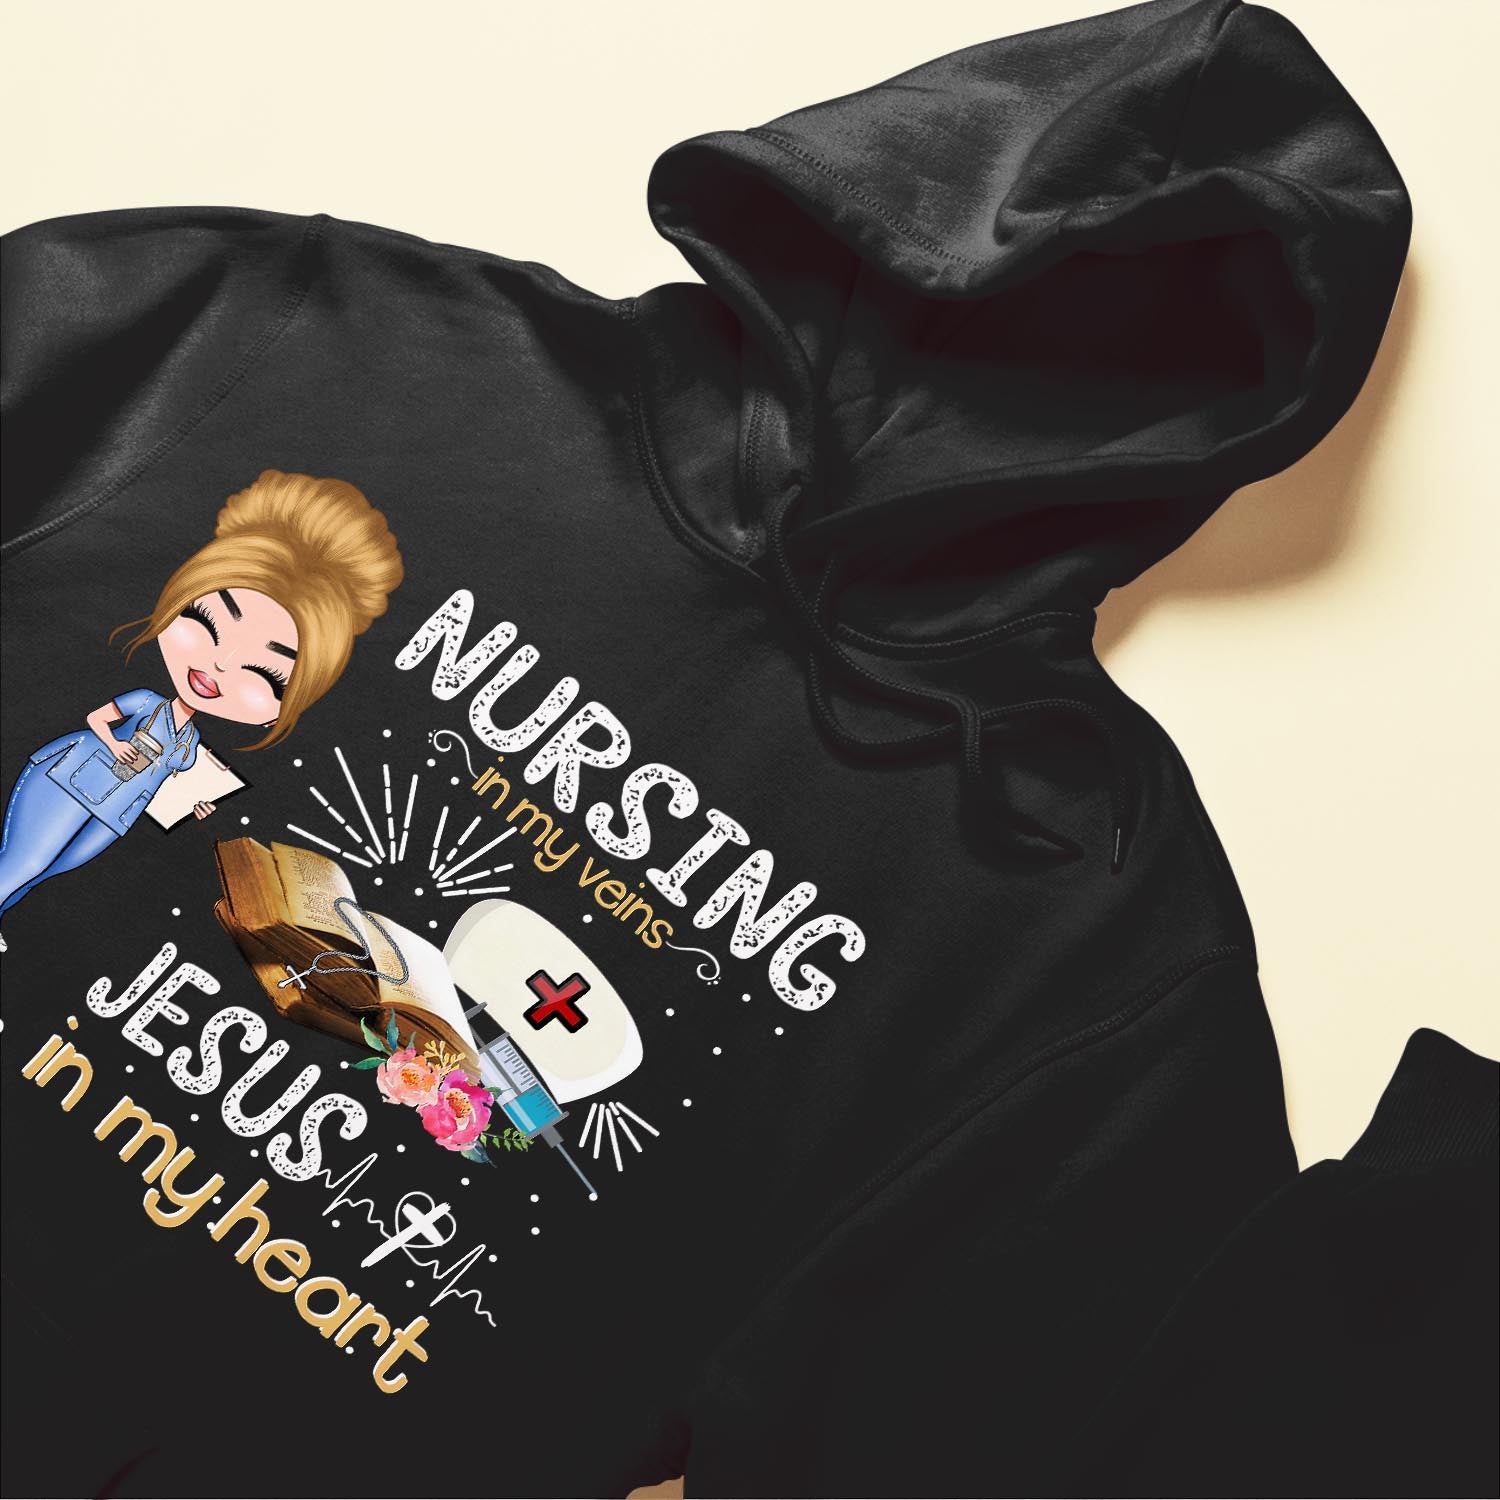 Nursing In My Veins - Personalized Shirt - Gift For Nurse